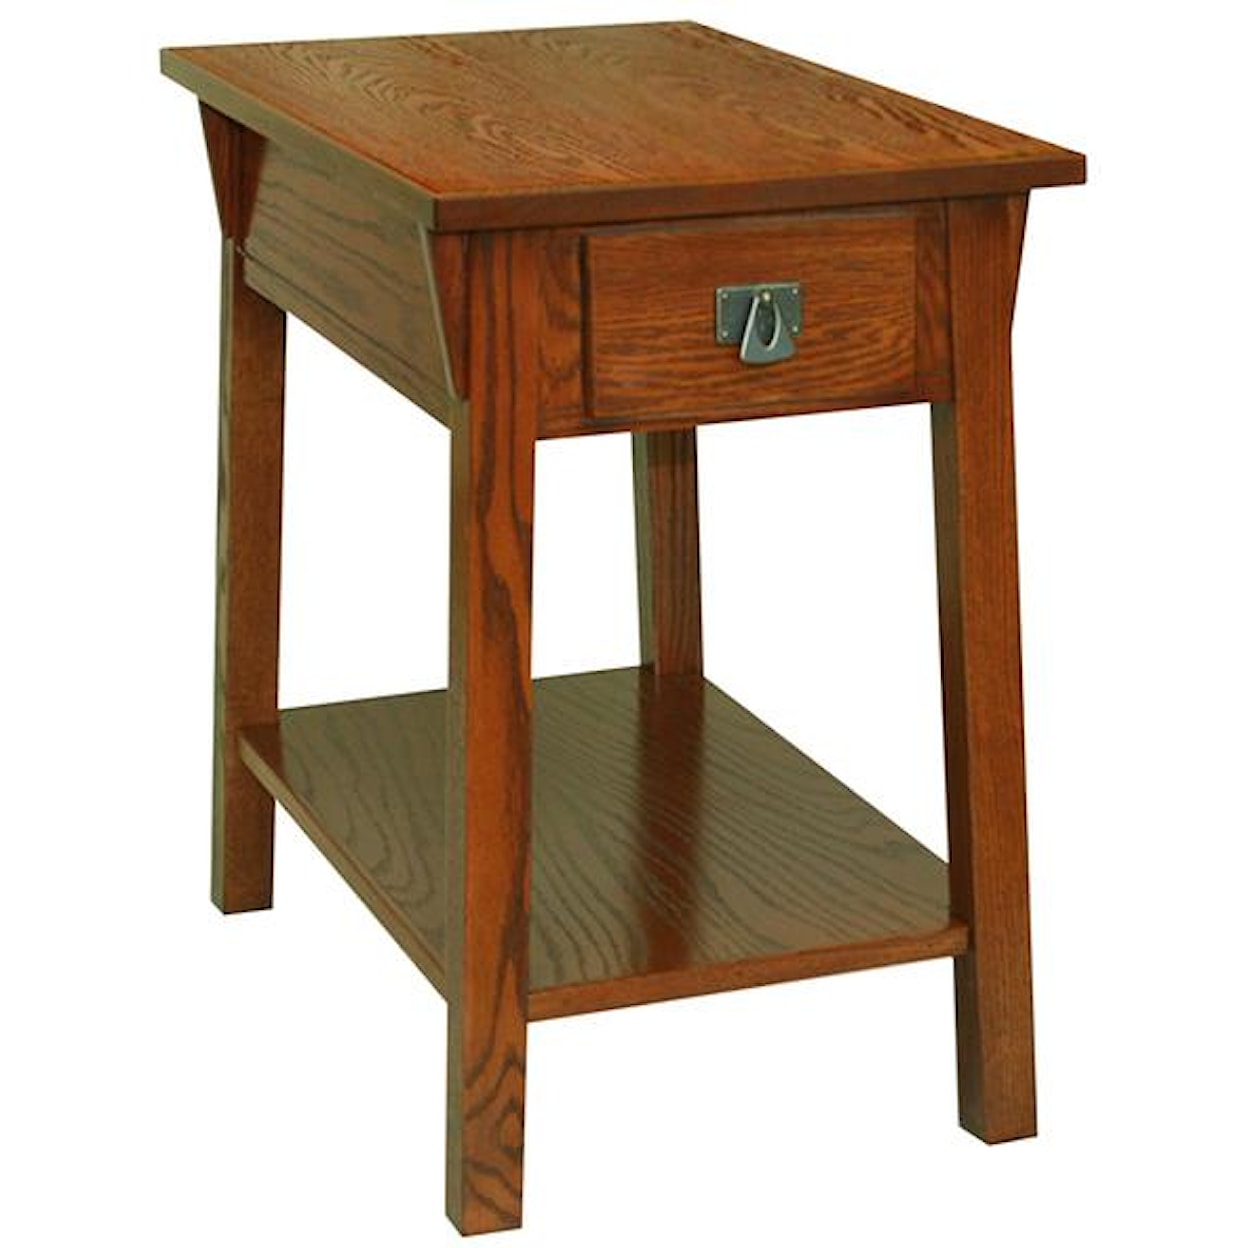 Leick Furniture Favorite Finds Mission Chairside Table